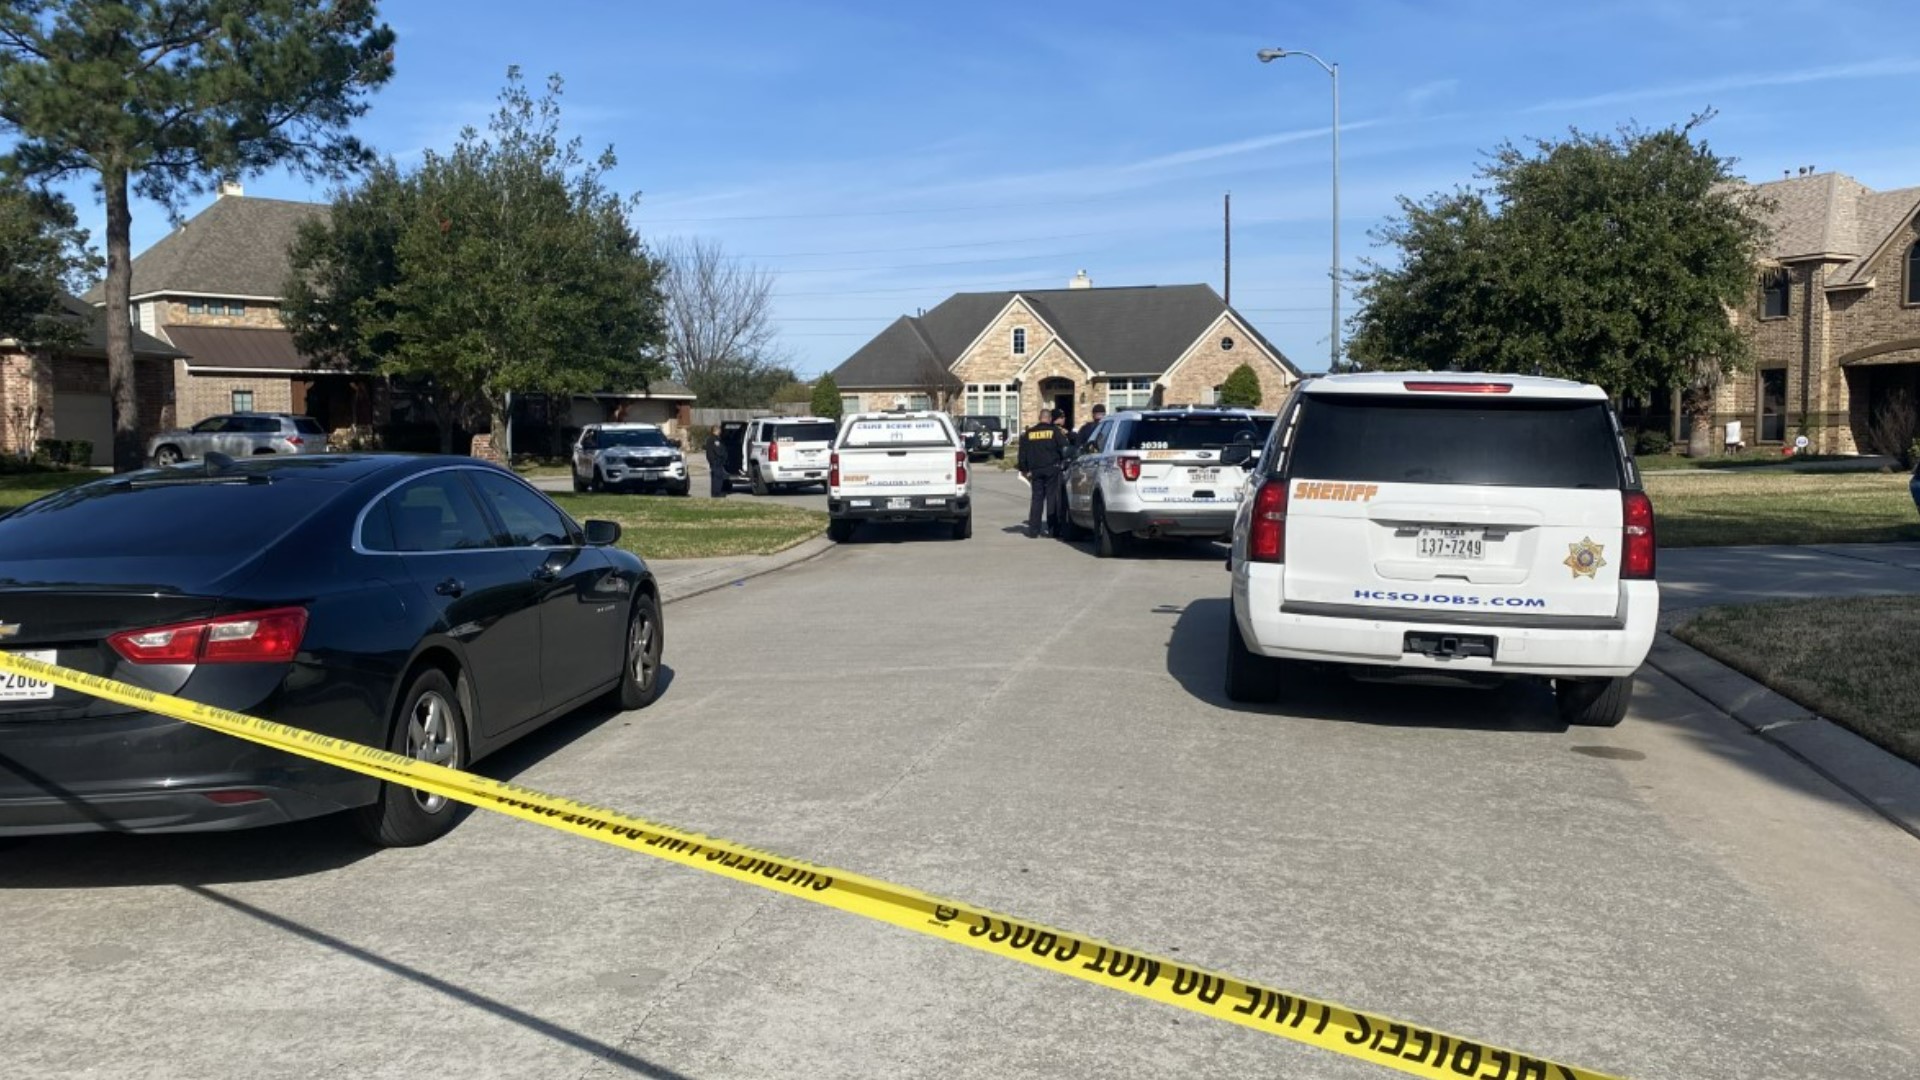 A homeowner was injured during a home invasion when he was grazed by a bullet from a gunman in the Klein area Friday morning, deputies said.